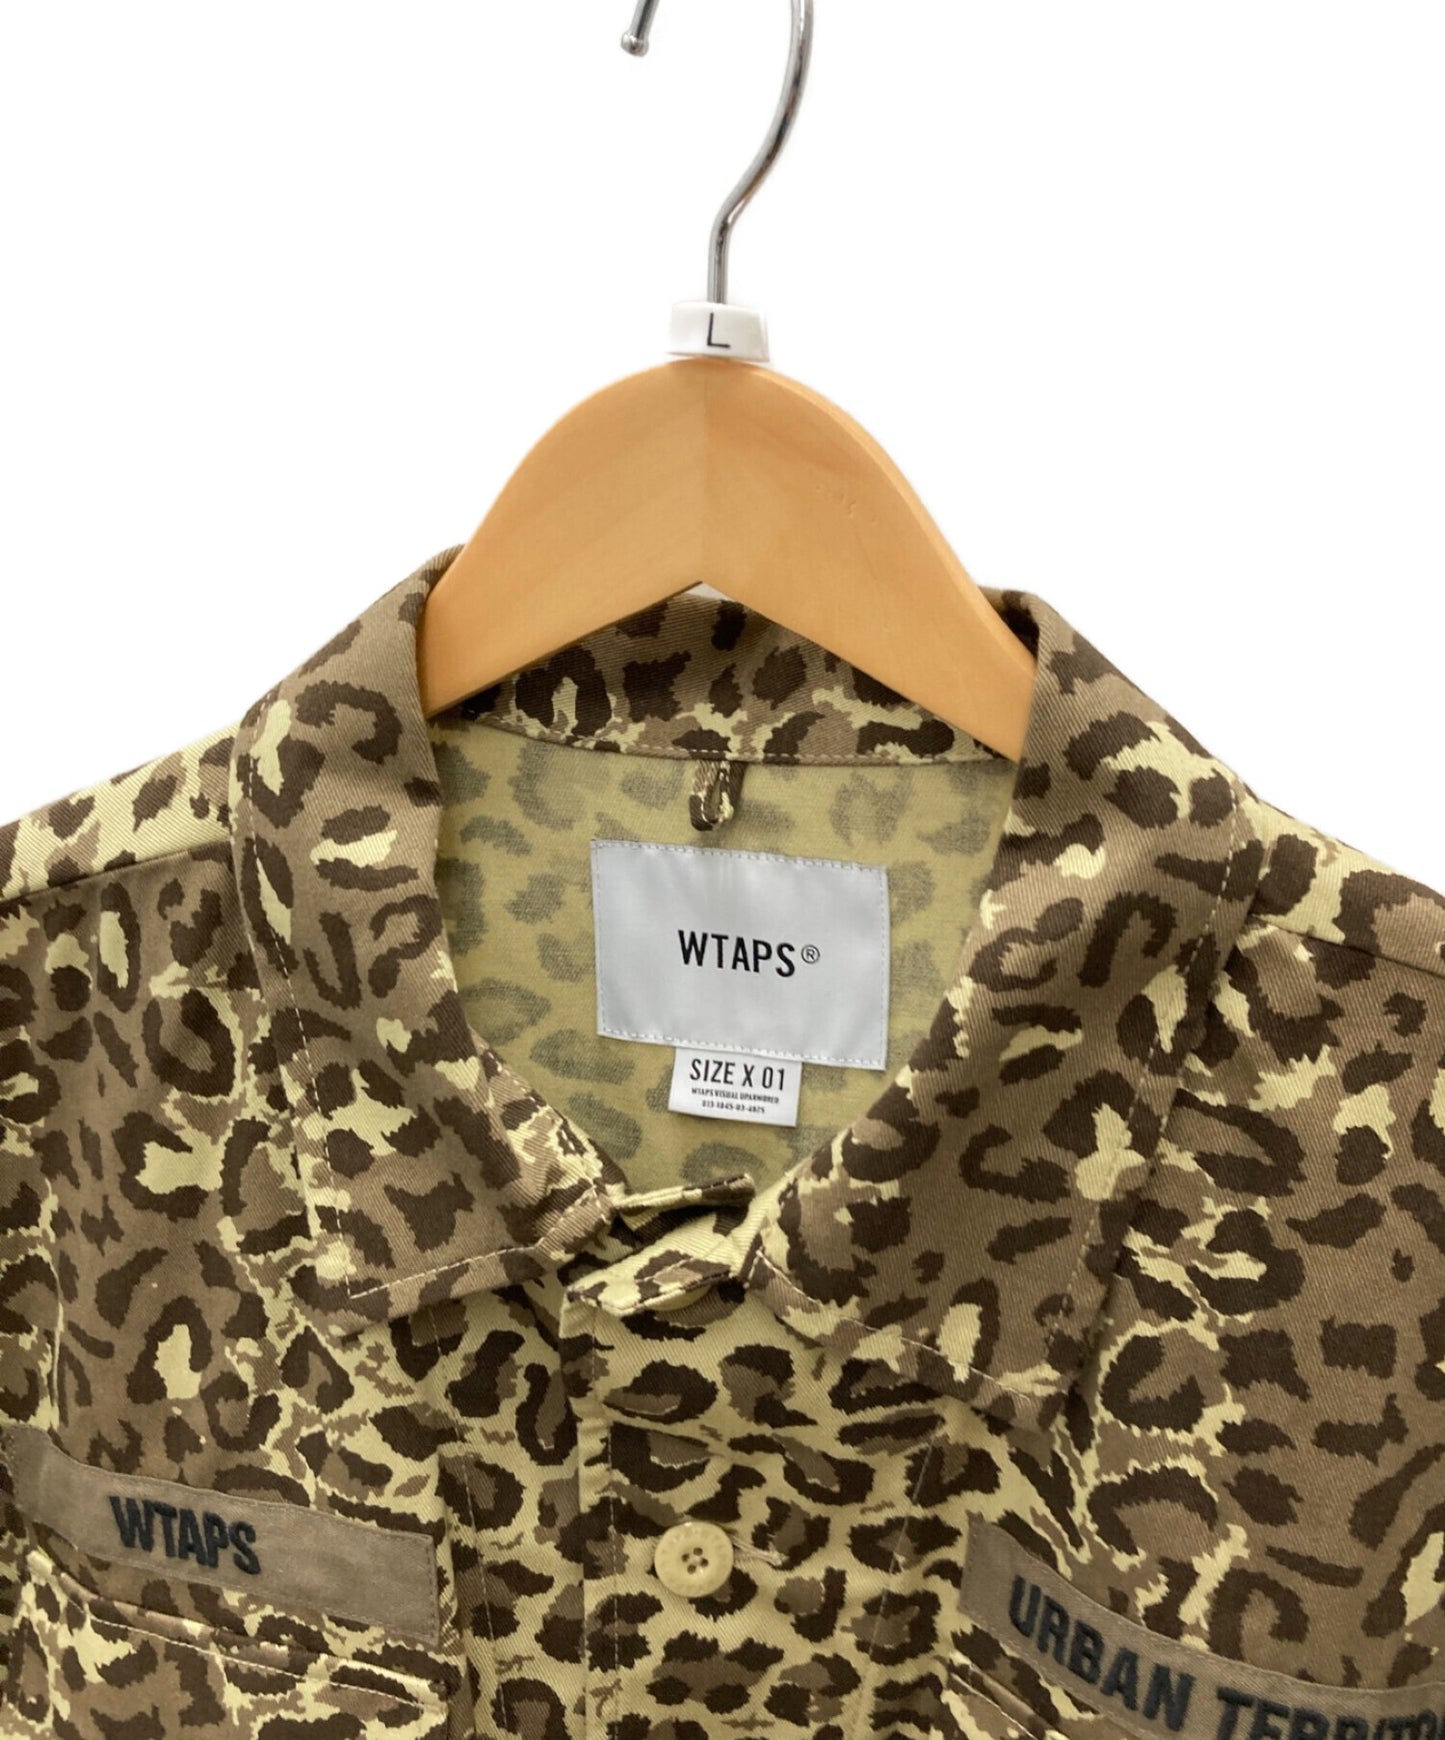 WTAPS military jacket | Archive Factory